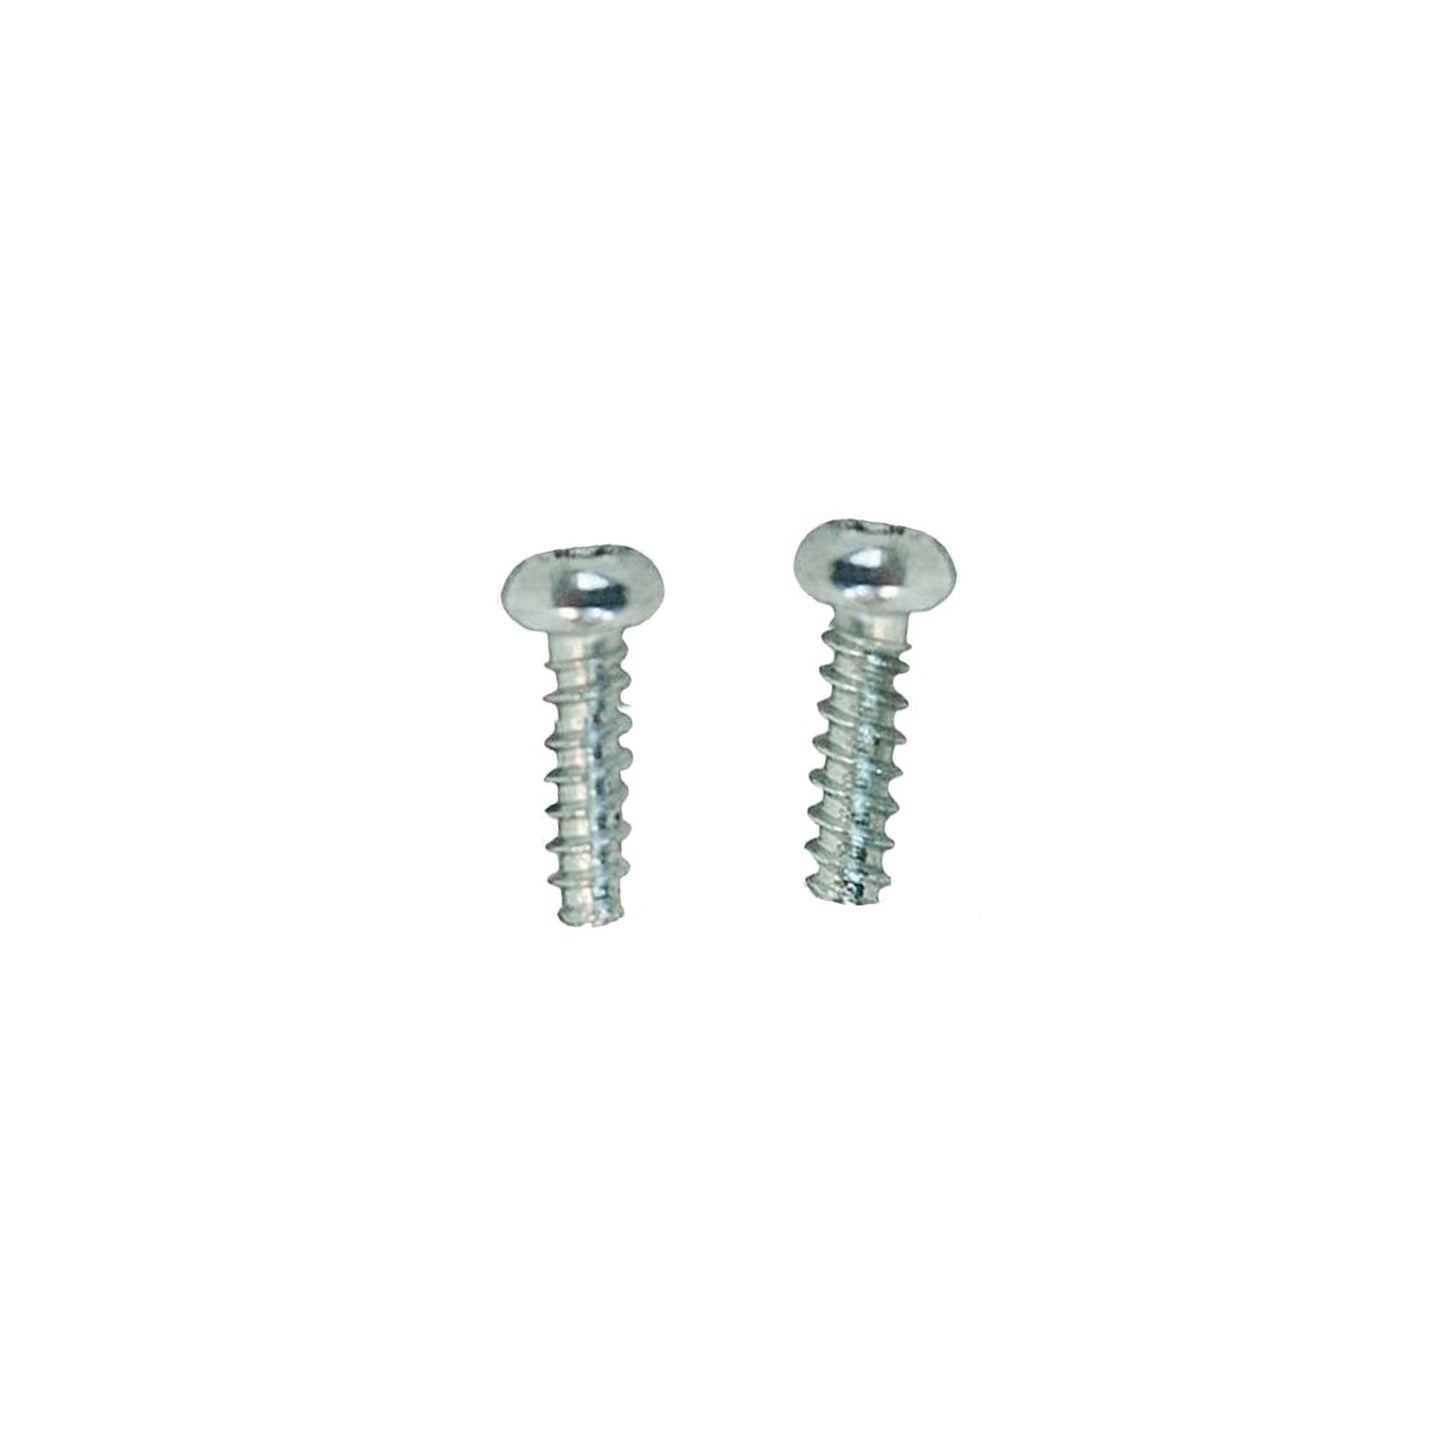 Nozzle Screw for BR-252A Inflatable Blower